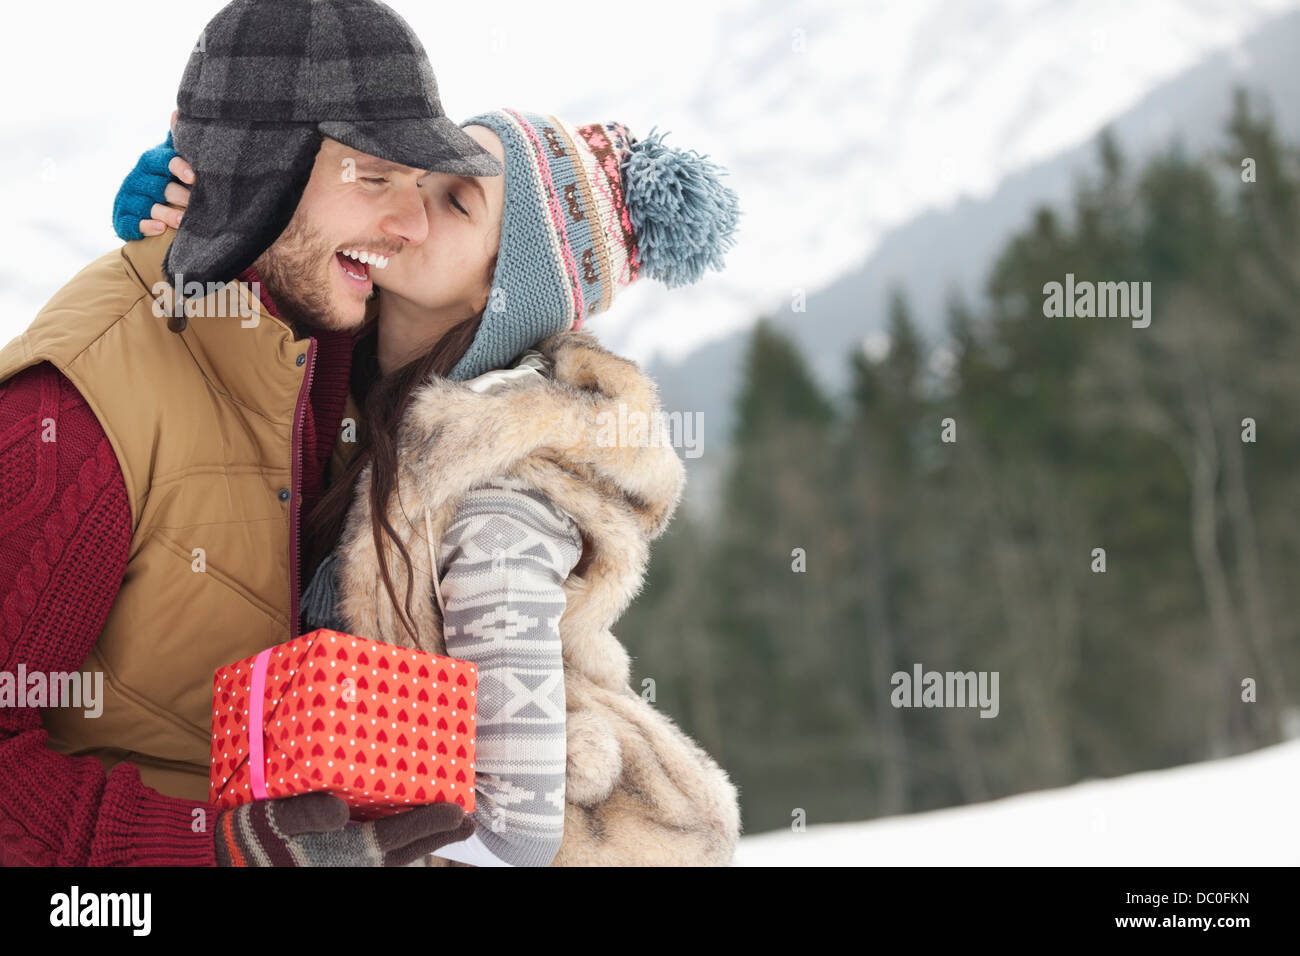 Happy couple with Christmas gift kissing in snowy field Stock Photo